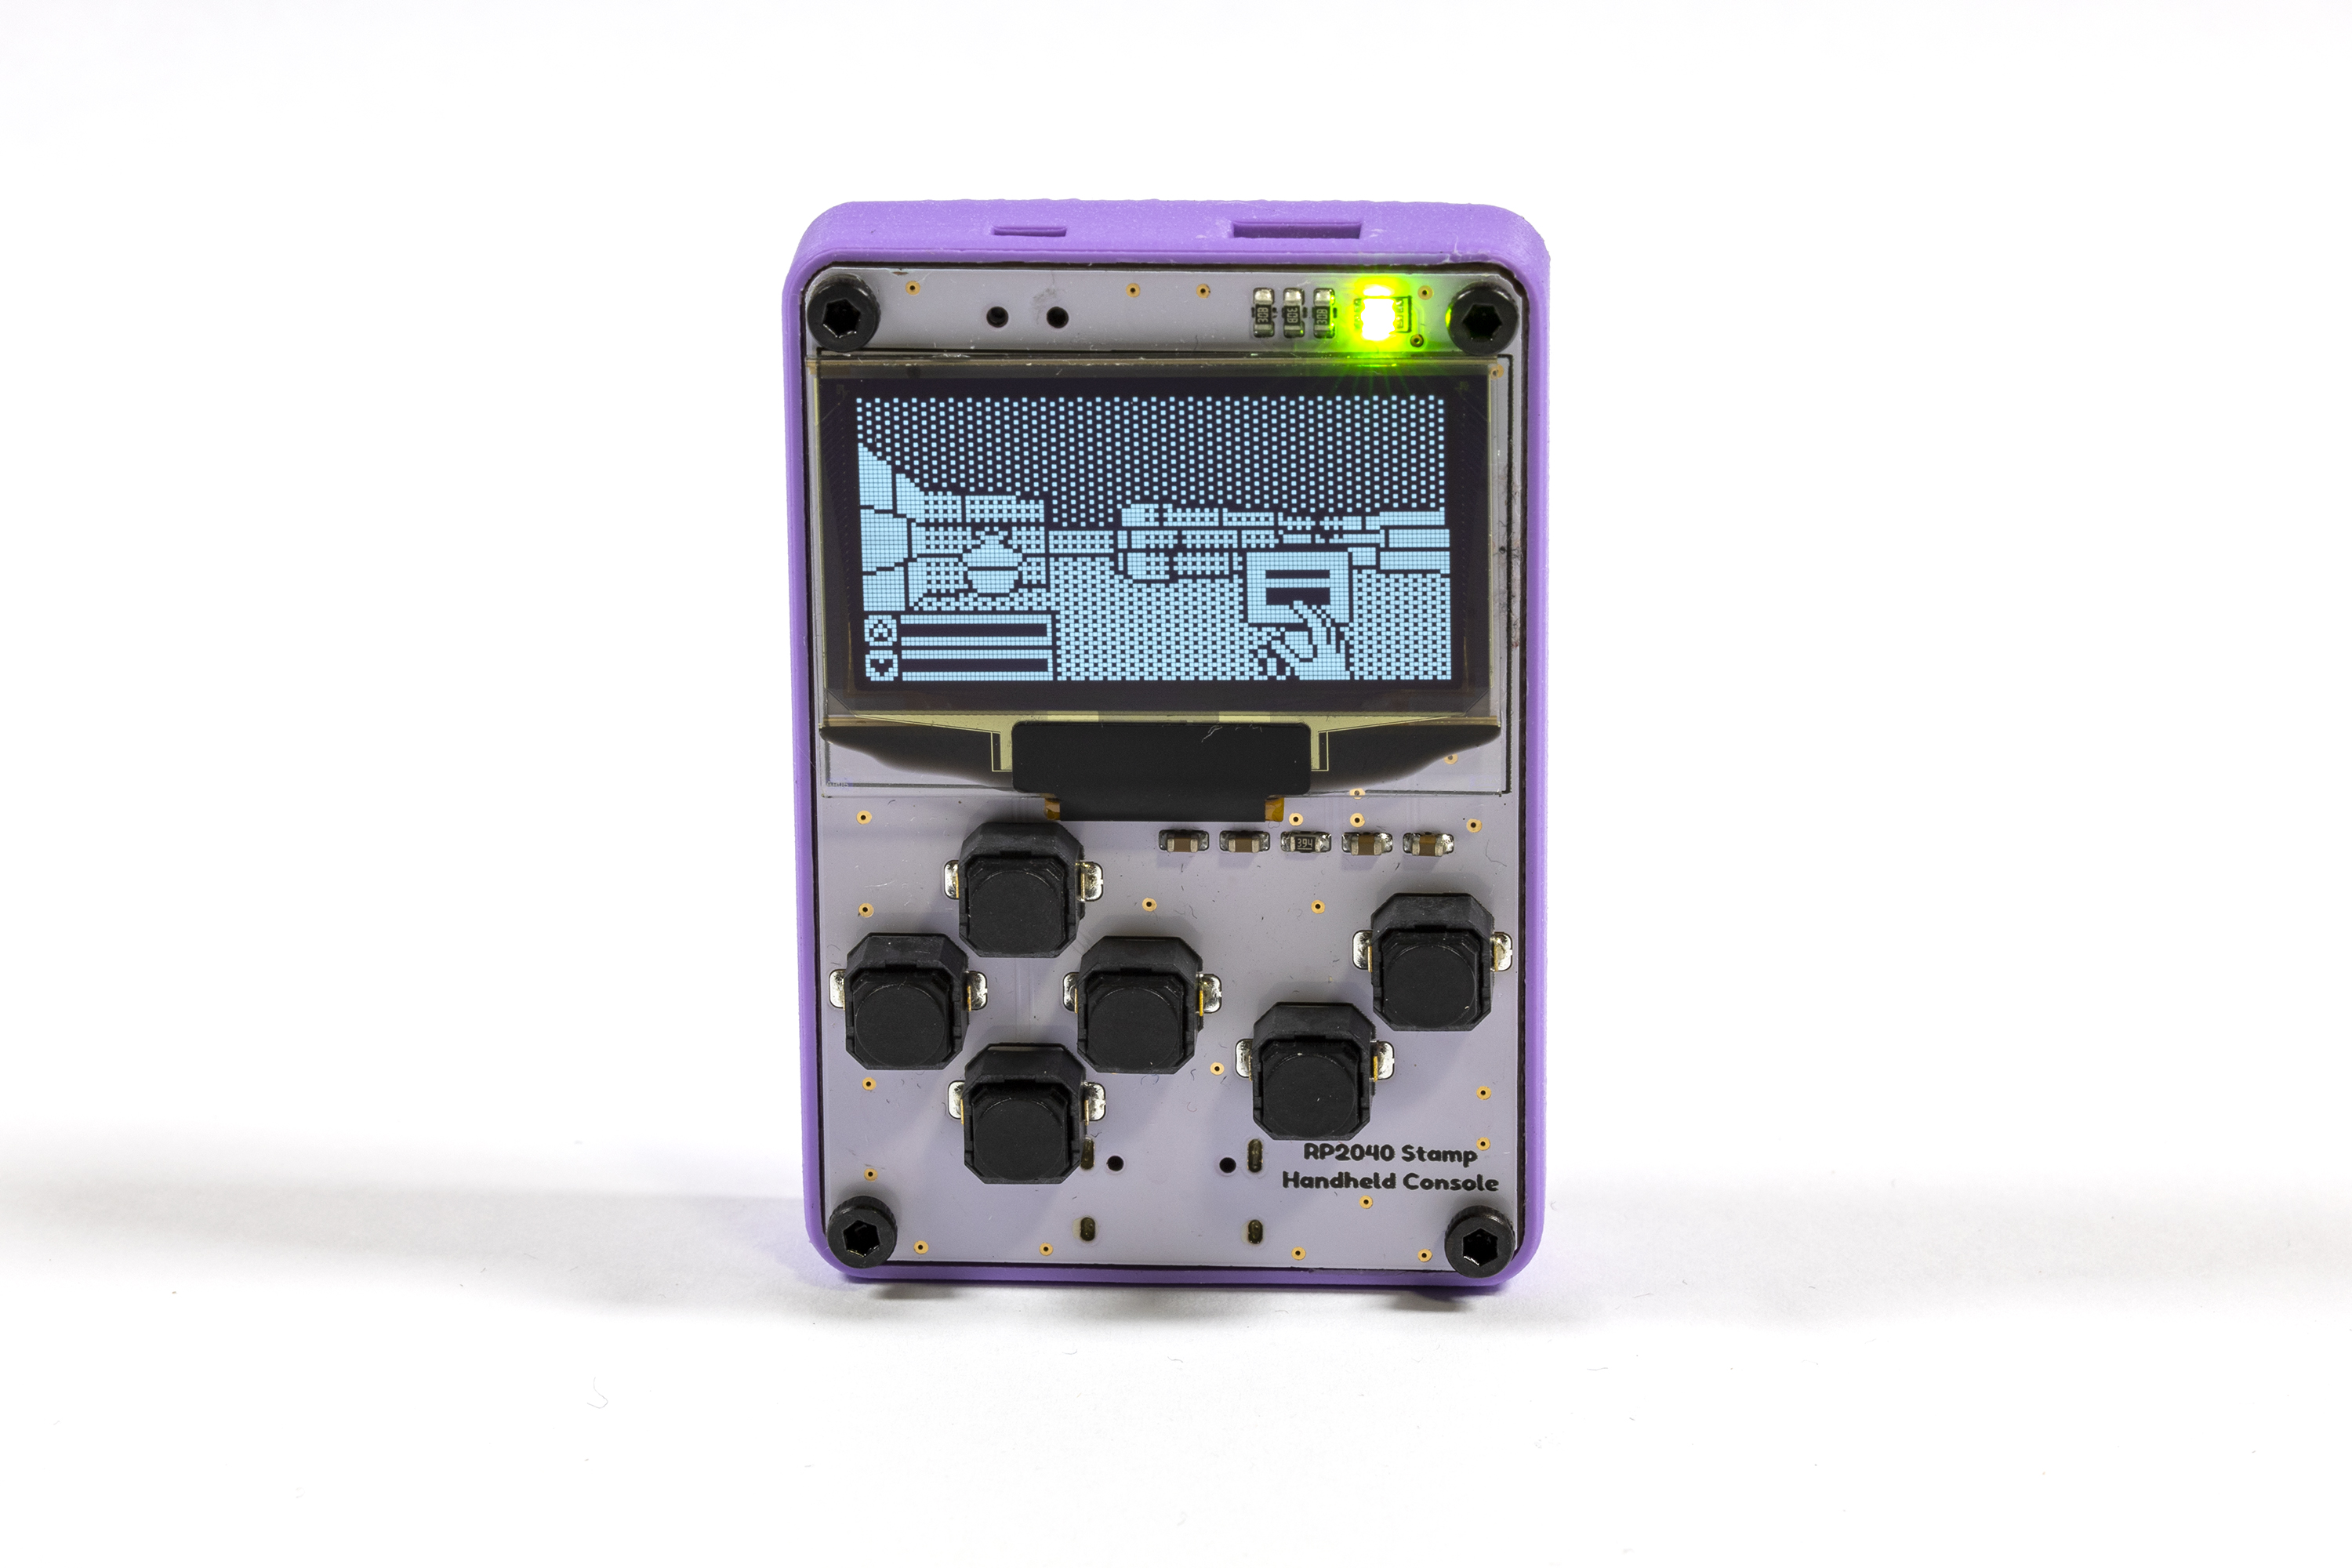 RP2040 Stamp Handheld Console Case